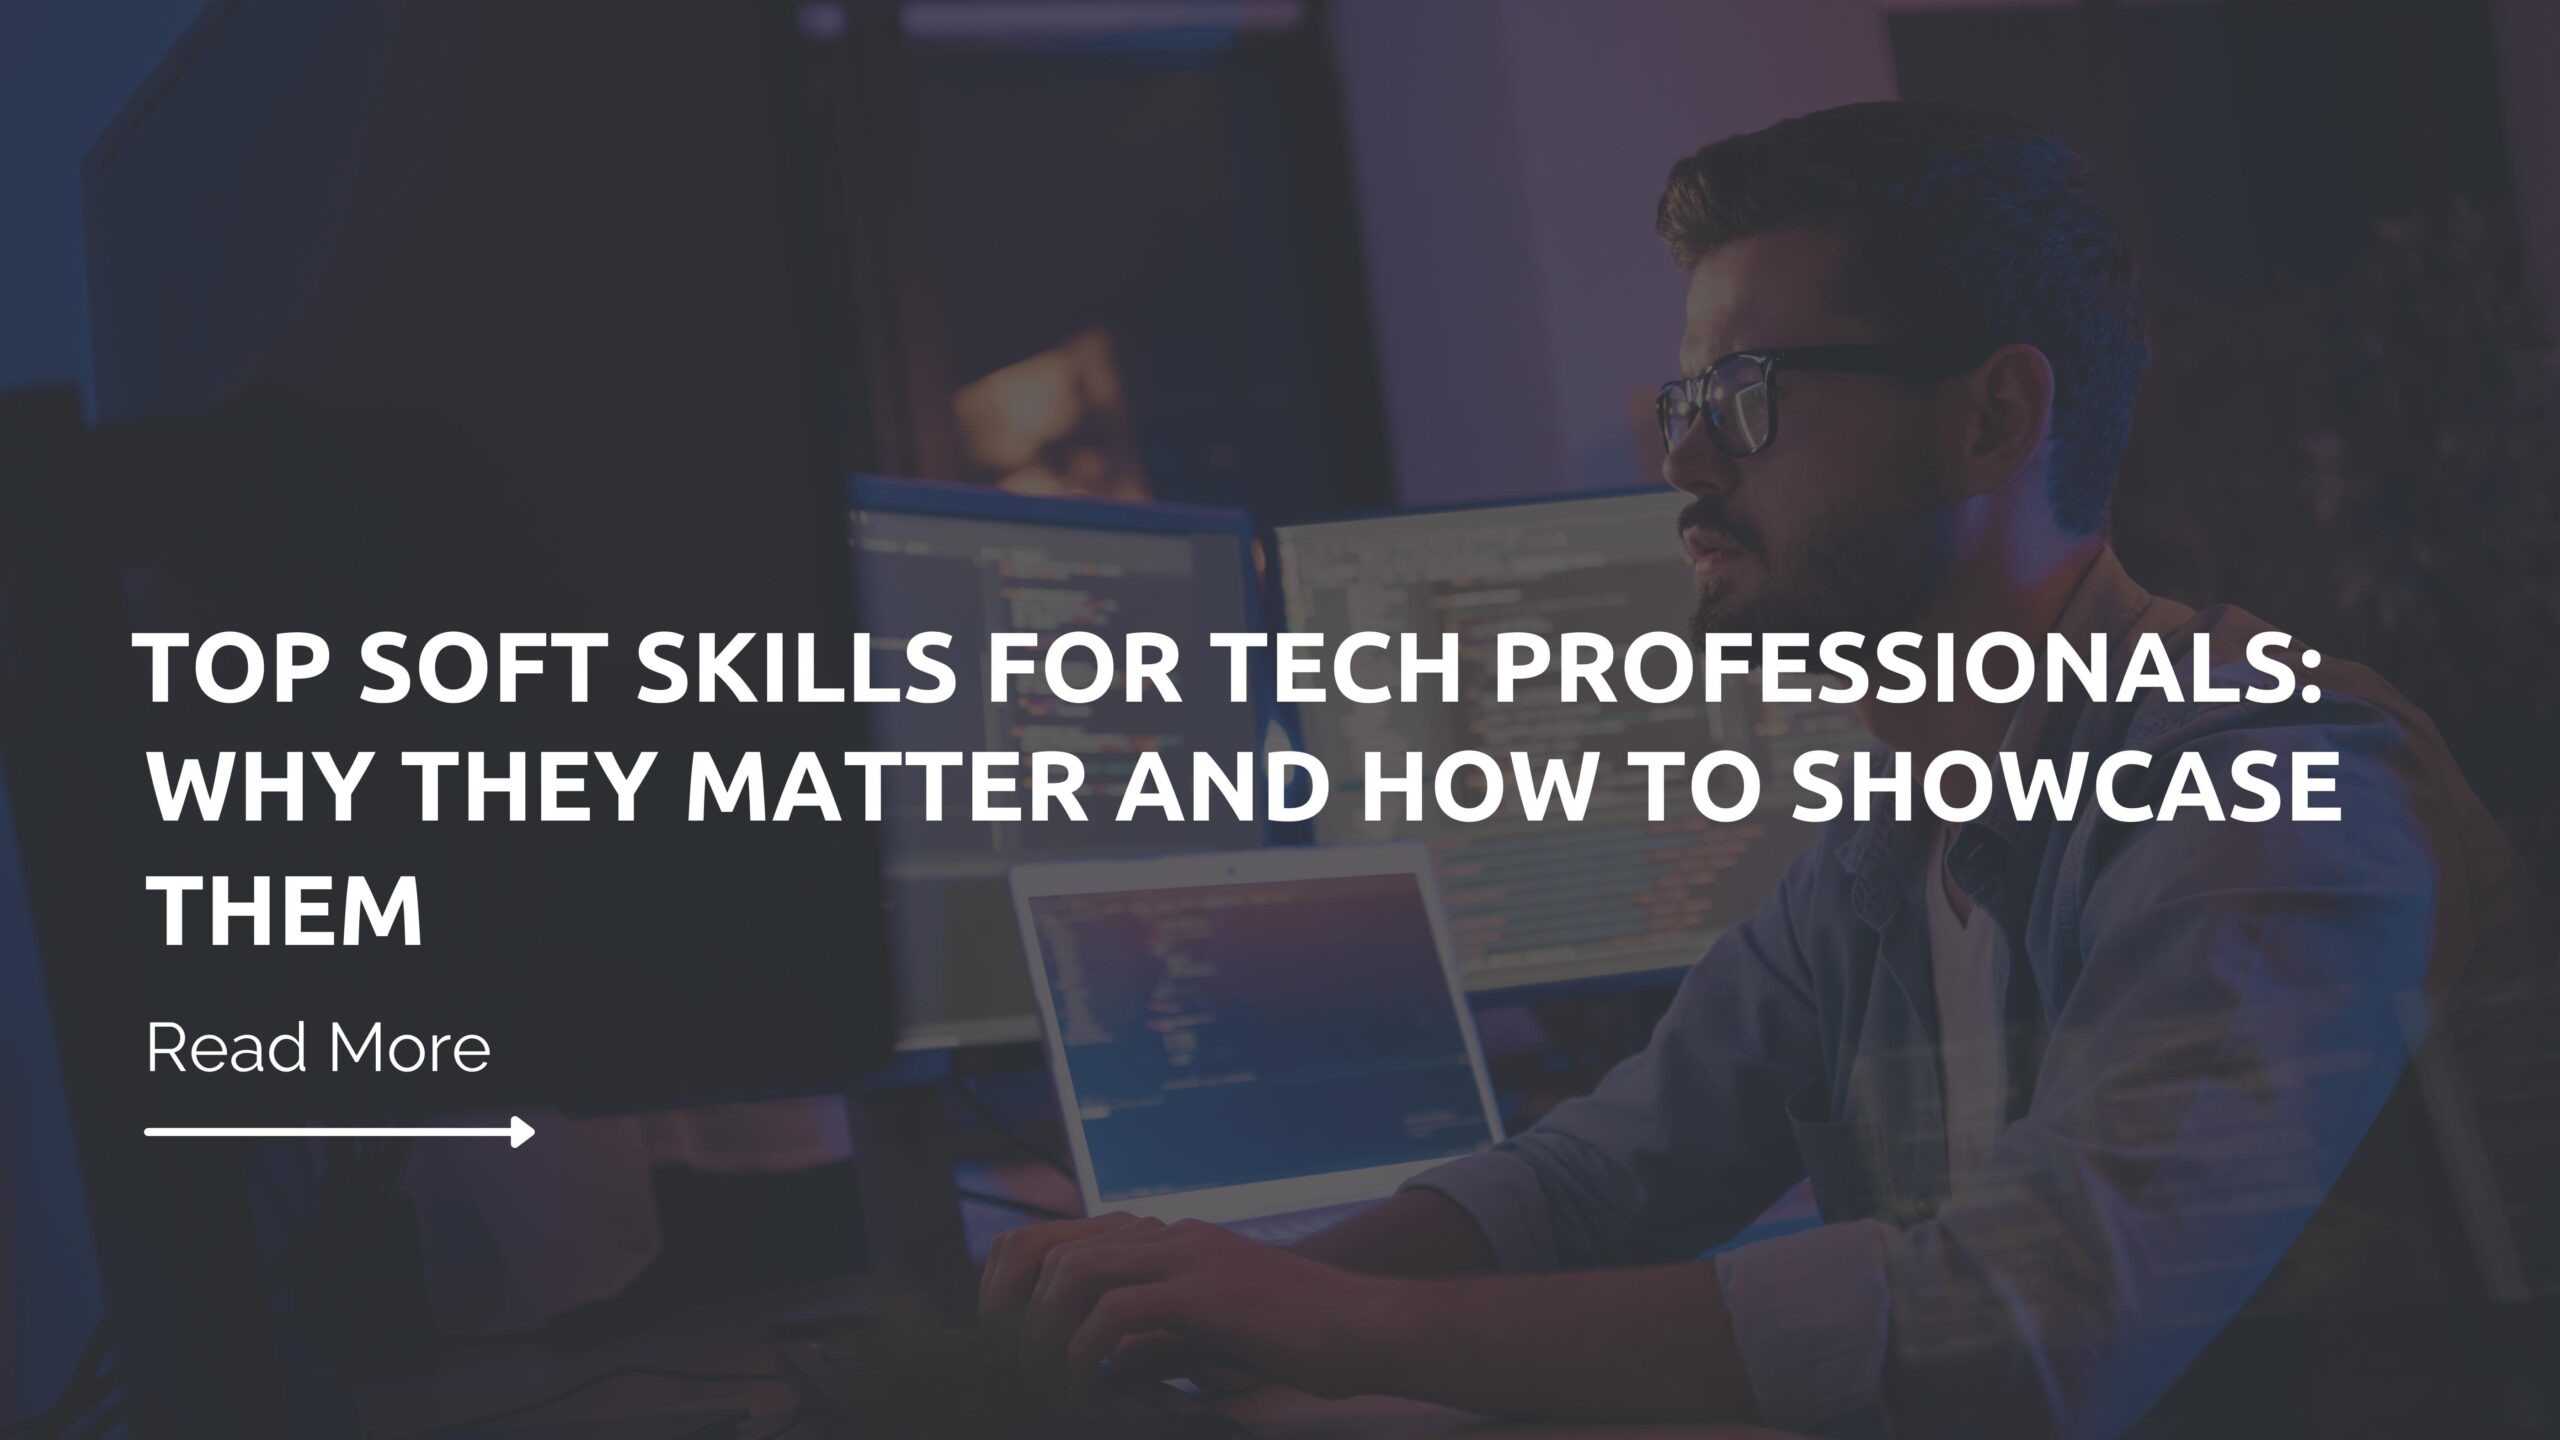 Top soft skills for tech professionals